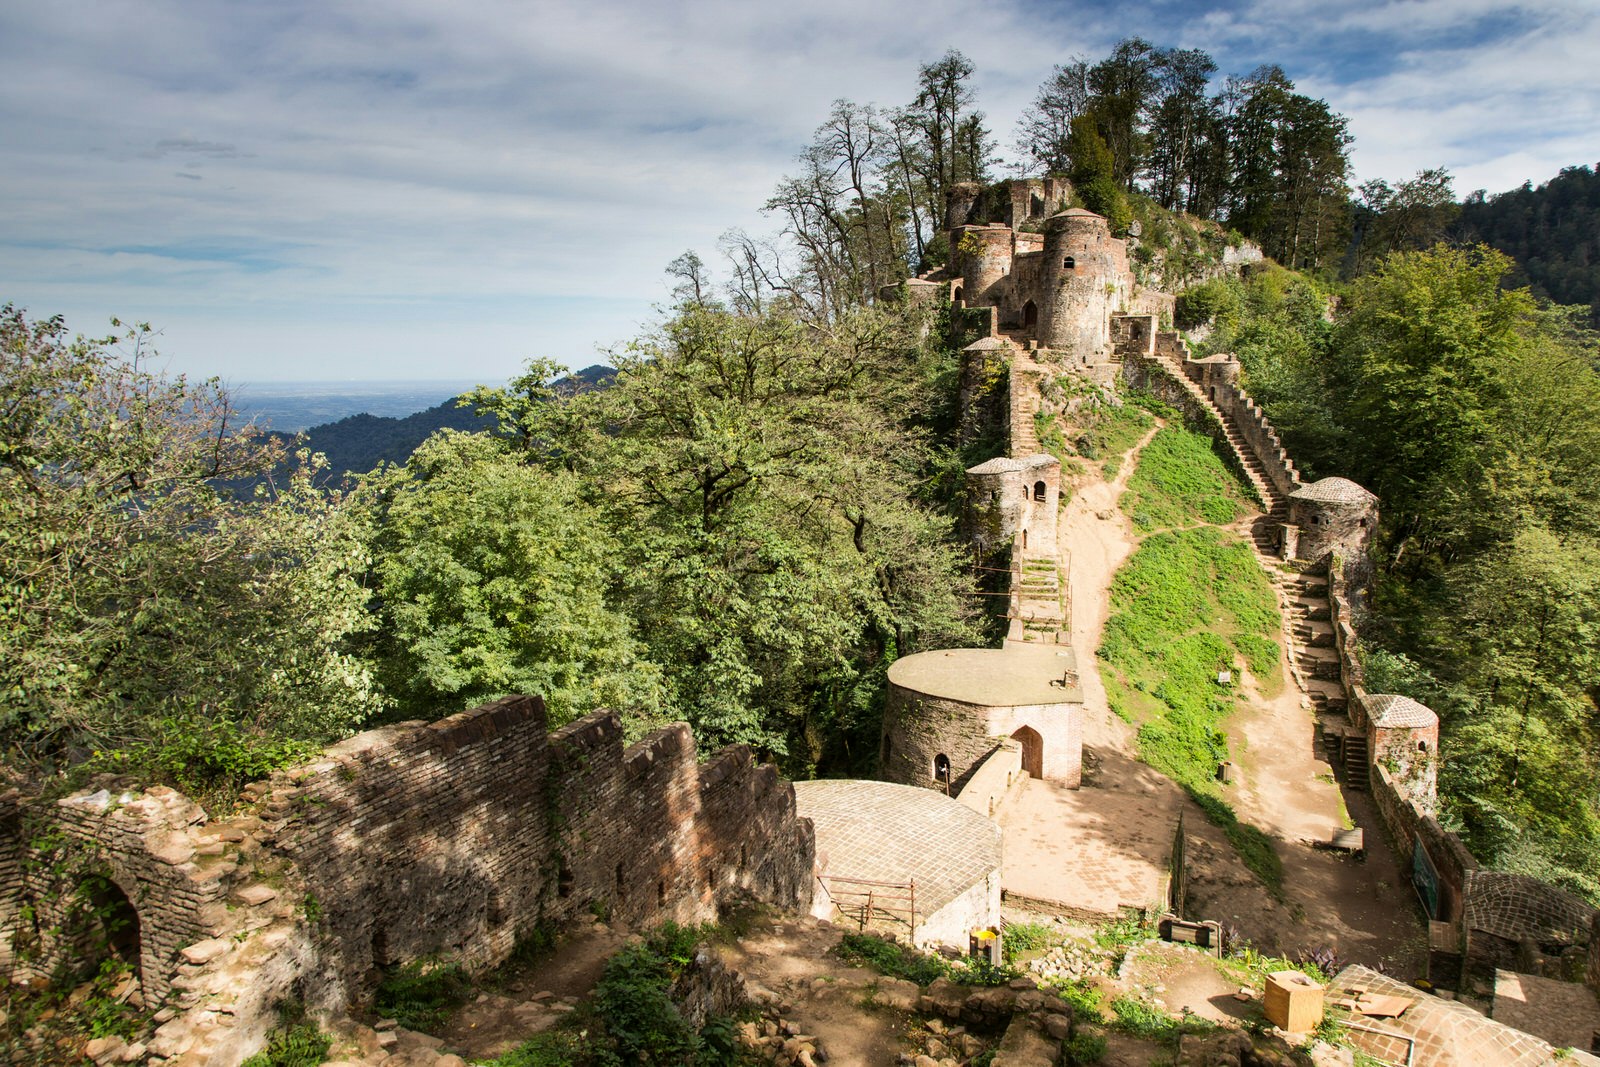 Rudkhan Castle, a brick and stone medieval castle located in Gilan province, Northern Iran © Udompeter / Shutterstock